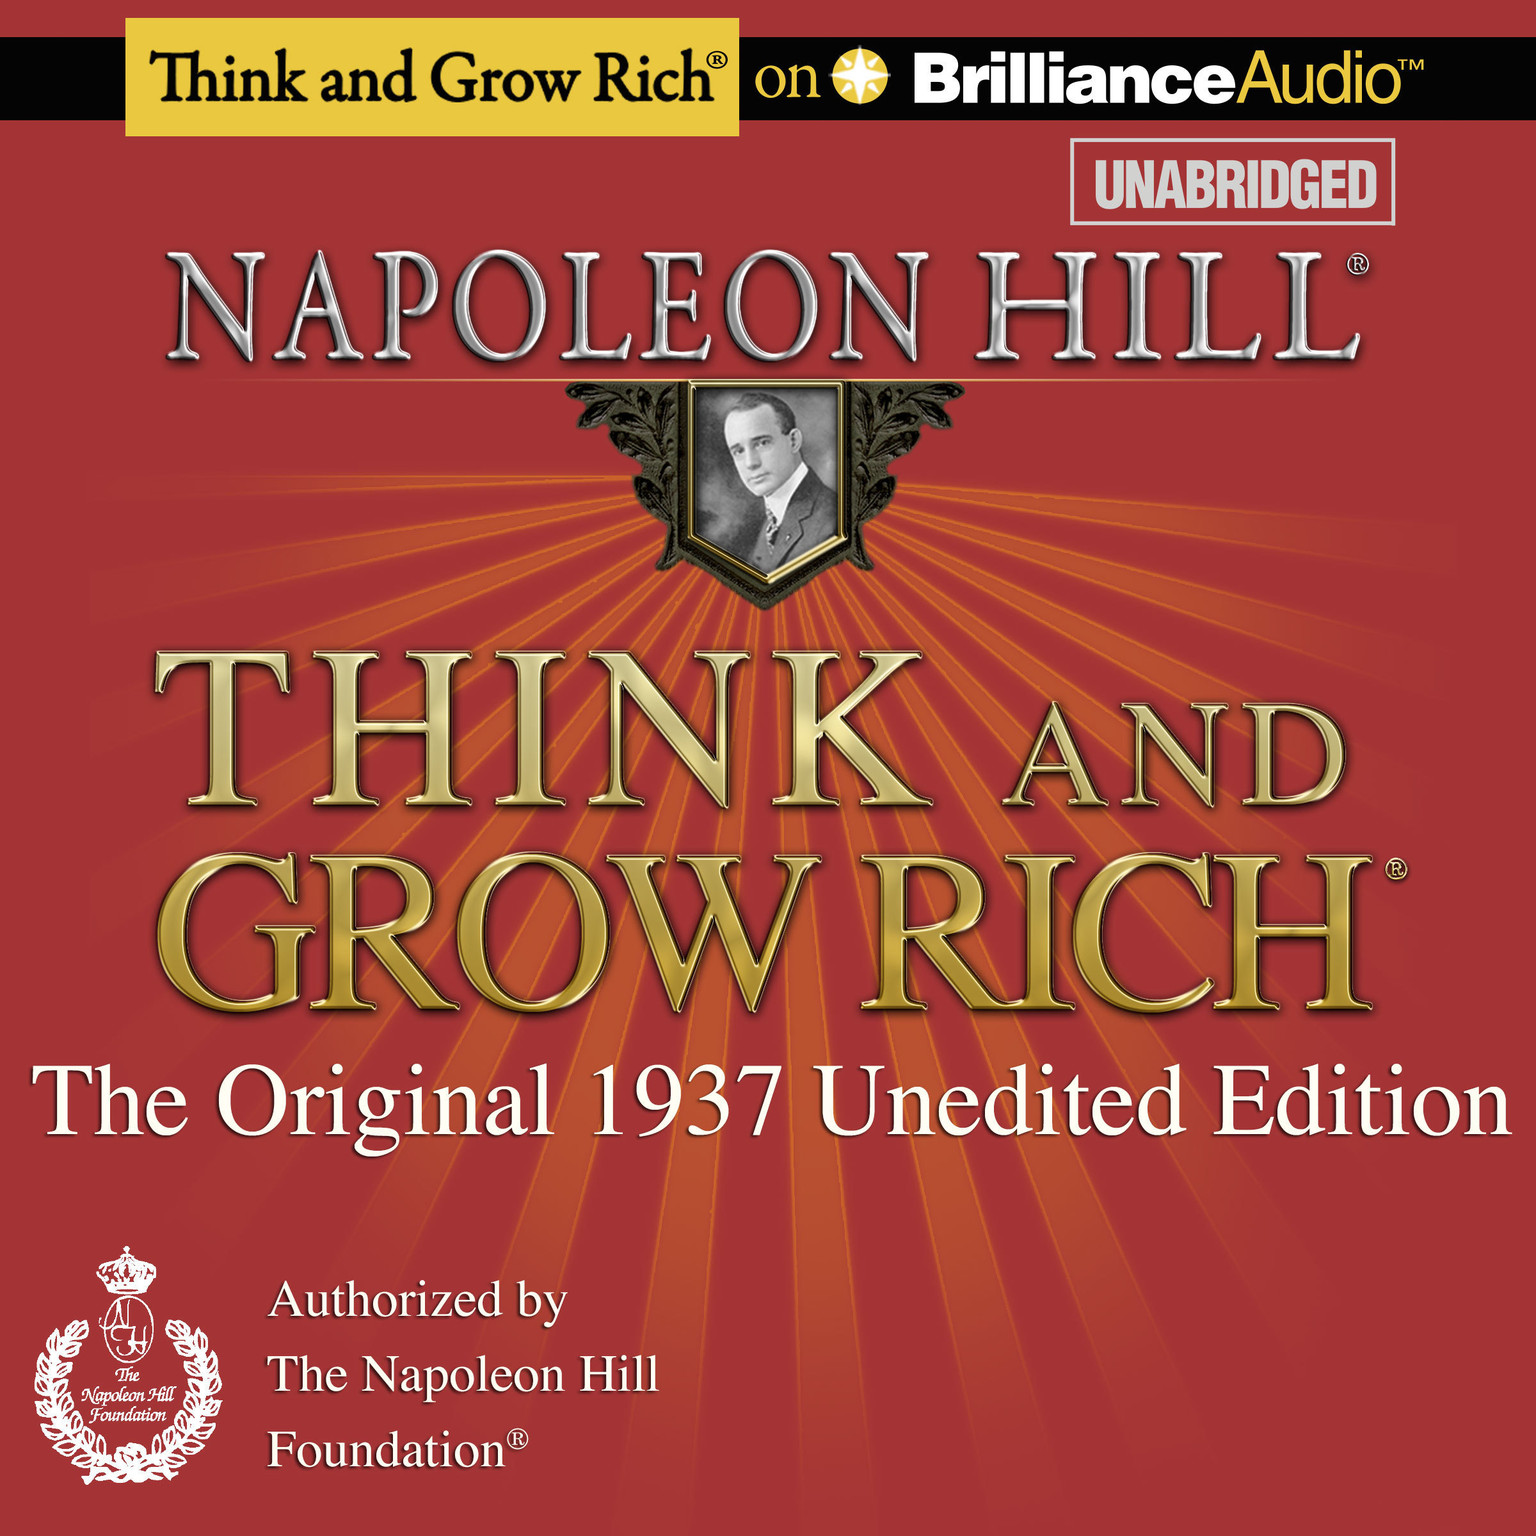 Think and grow rich review